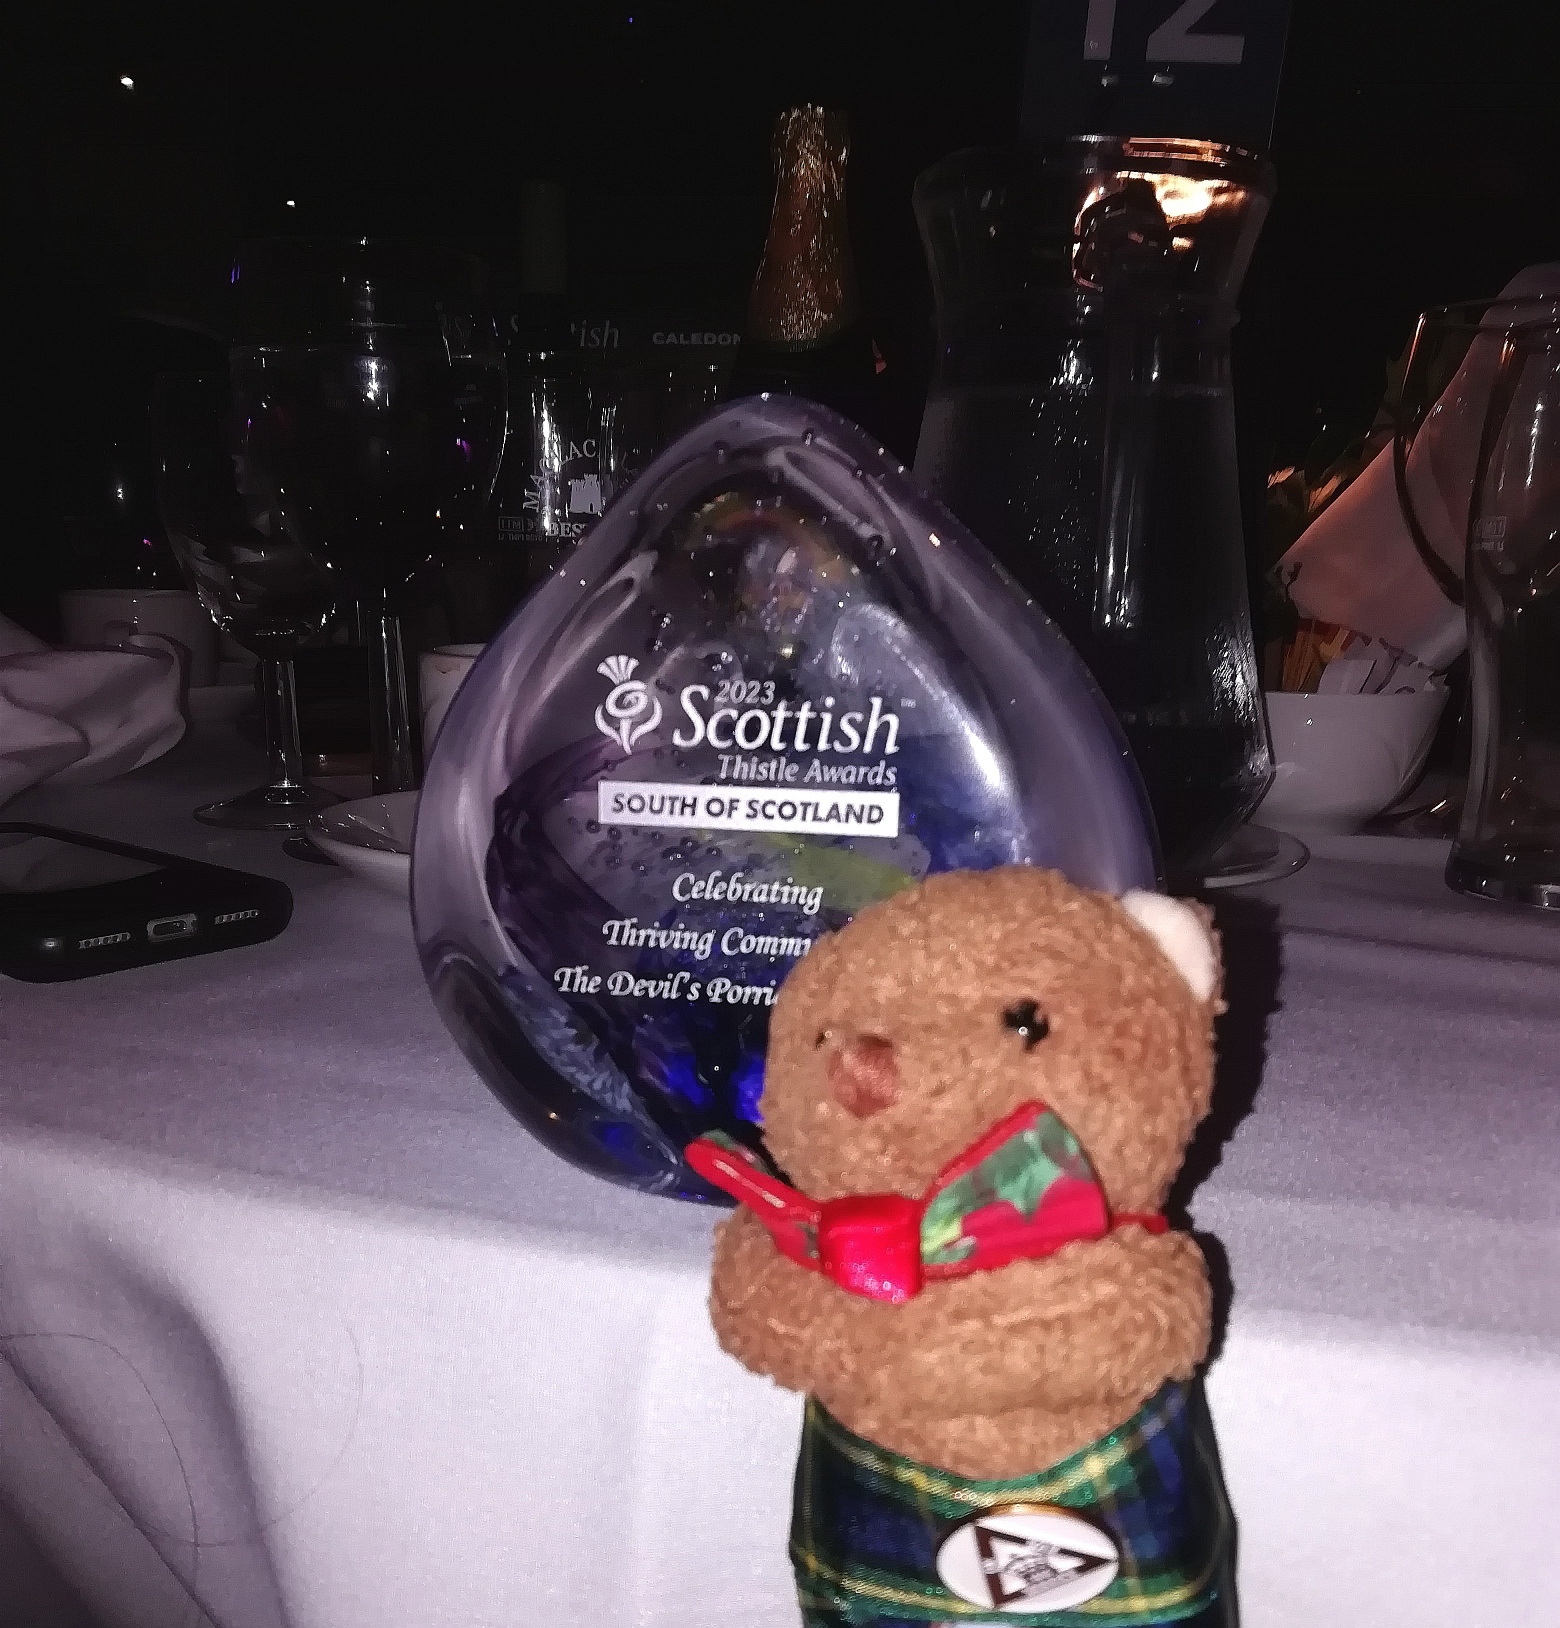 A Thistle Award for 'Celebrating Thriving Communities' with a bear toy stood in front of it.